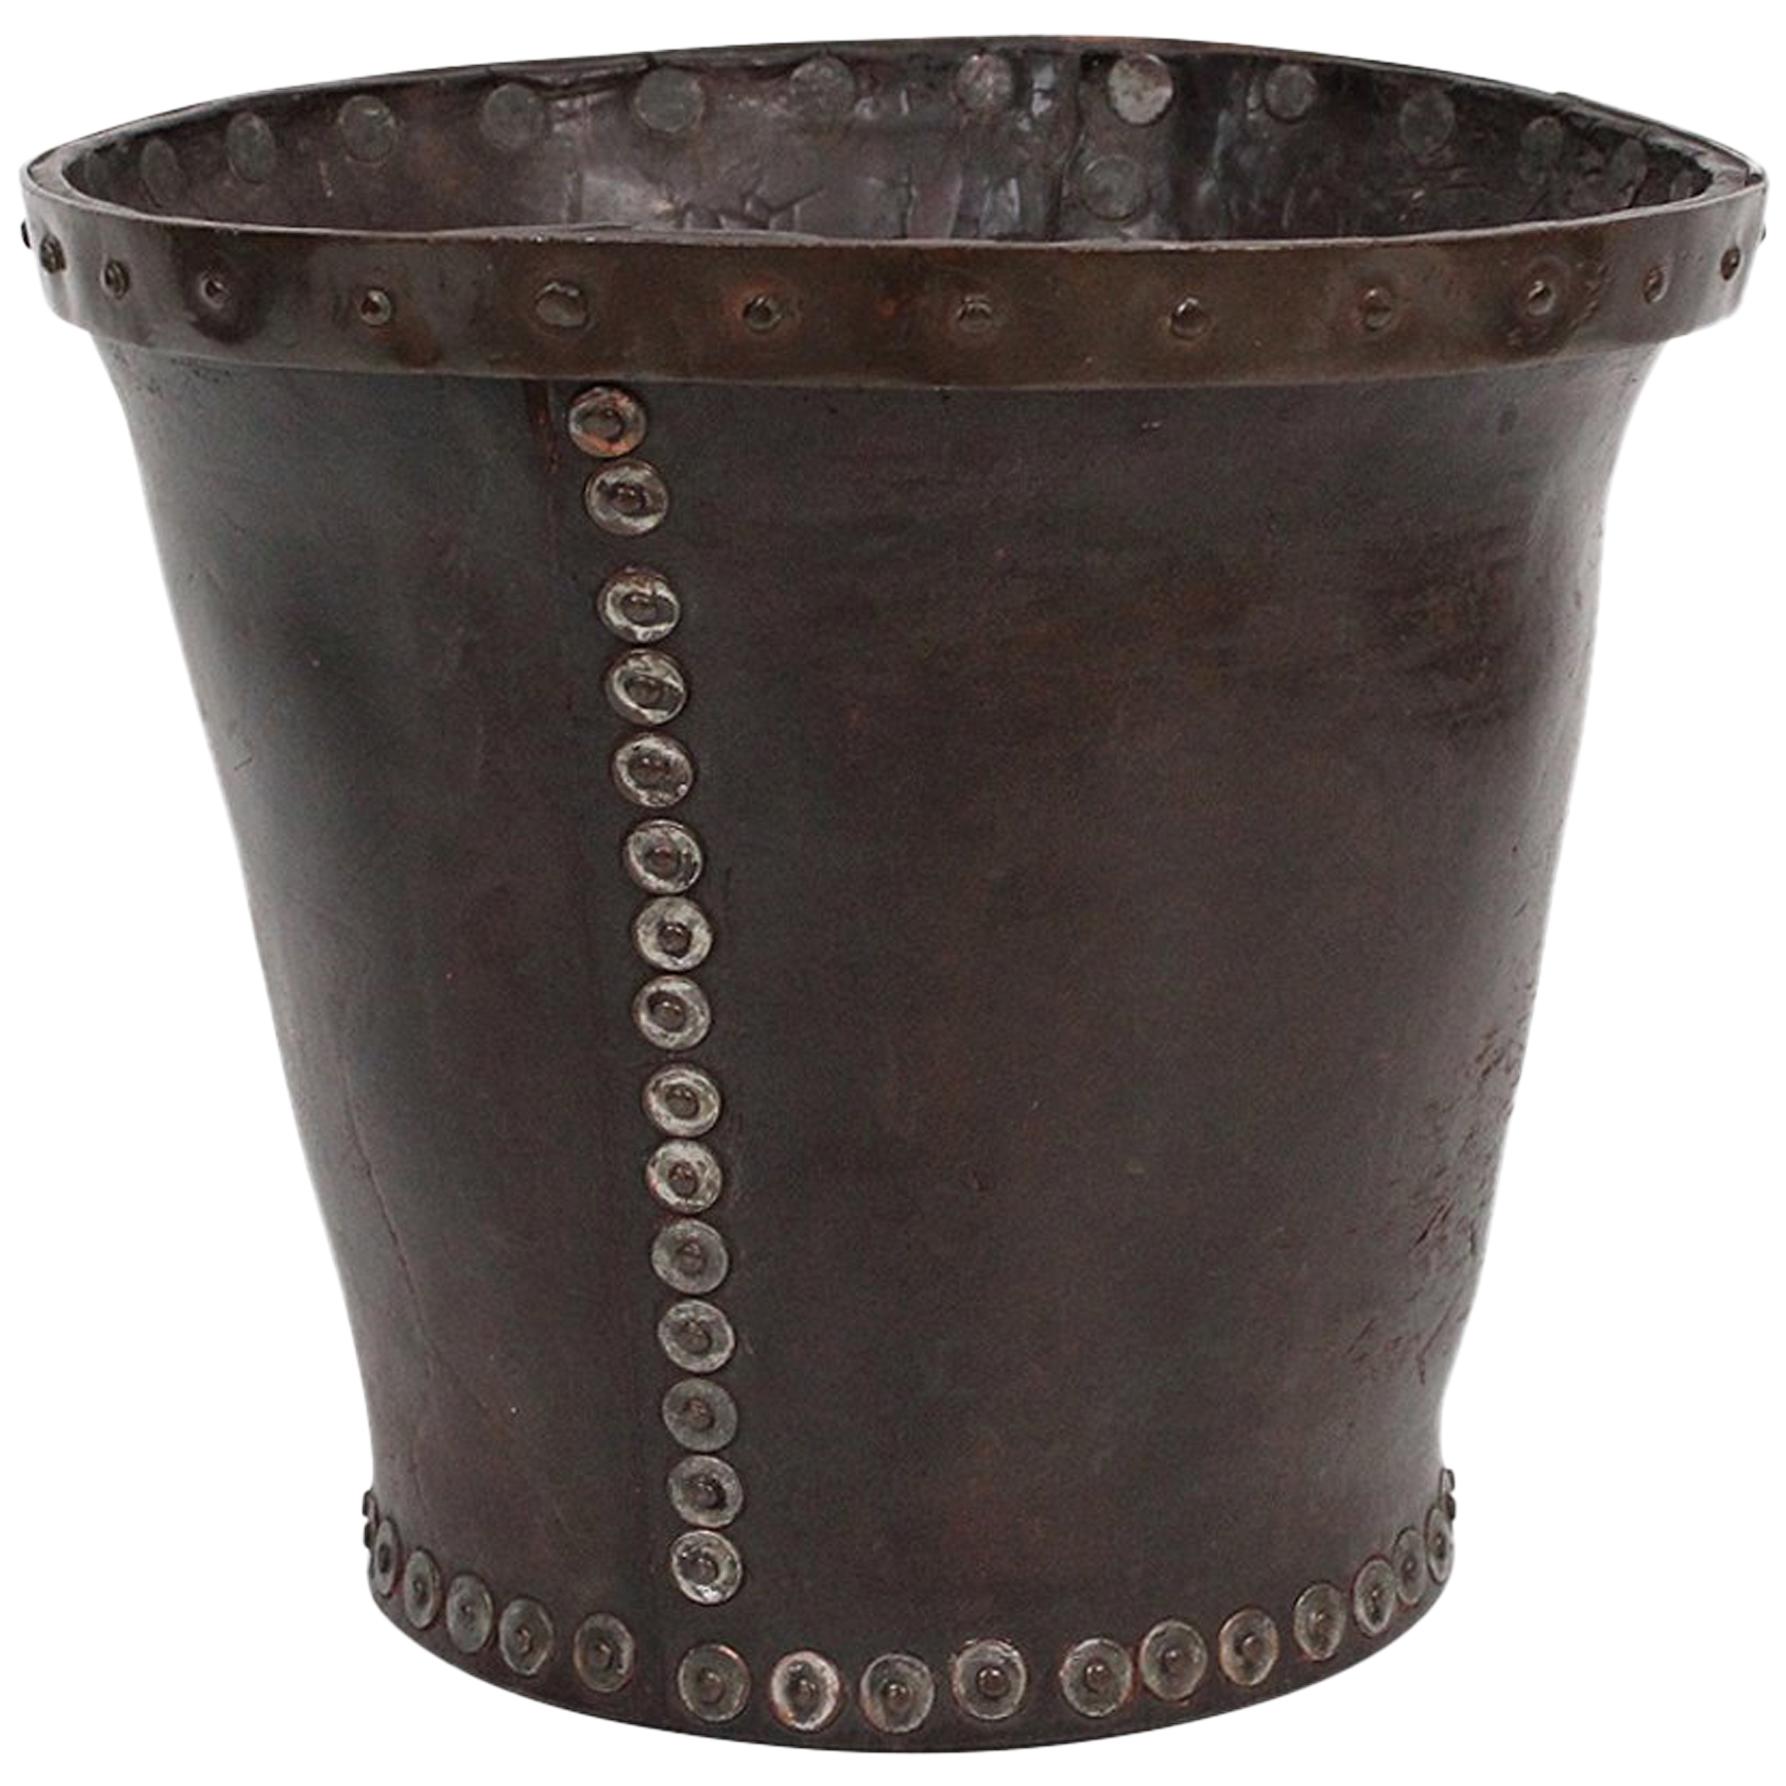 Distressed and Riveted Leather Wastebasket